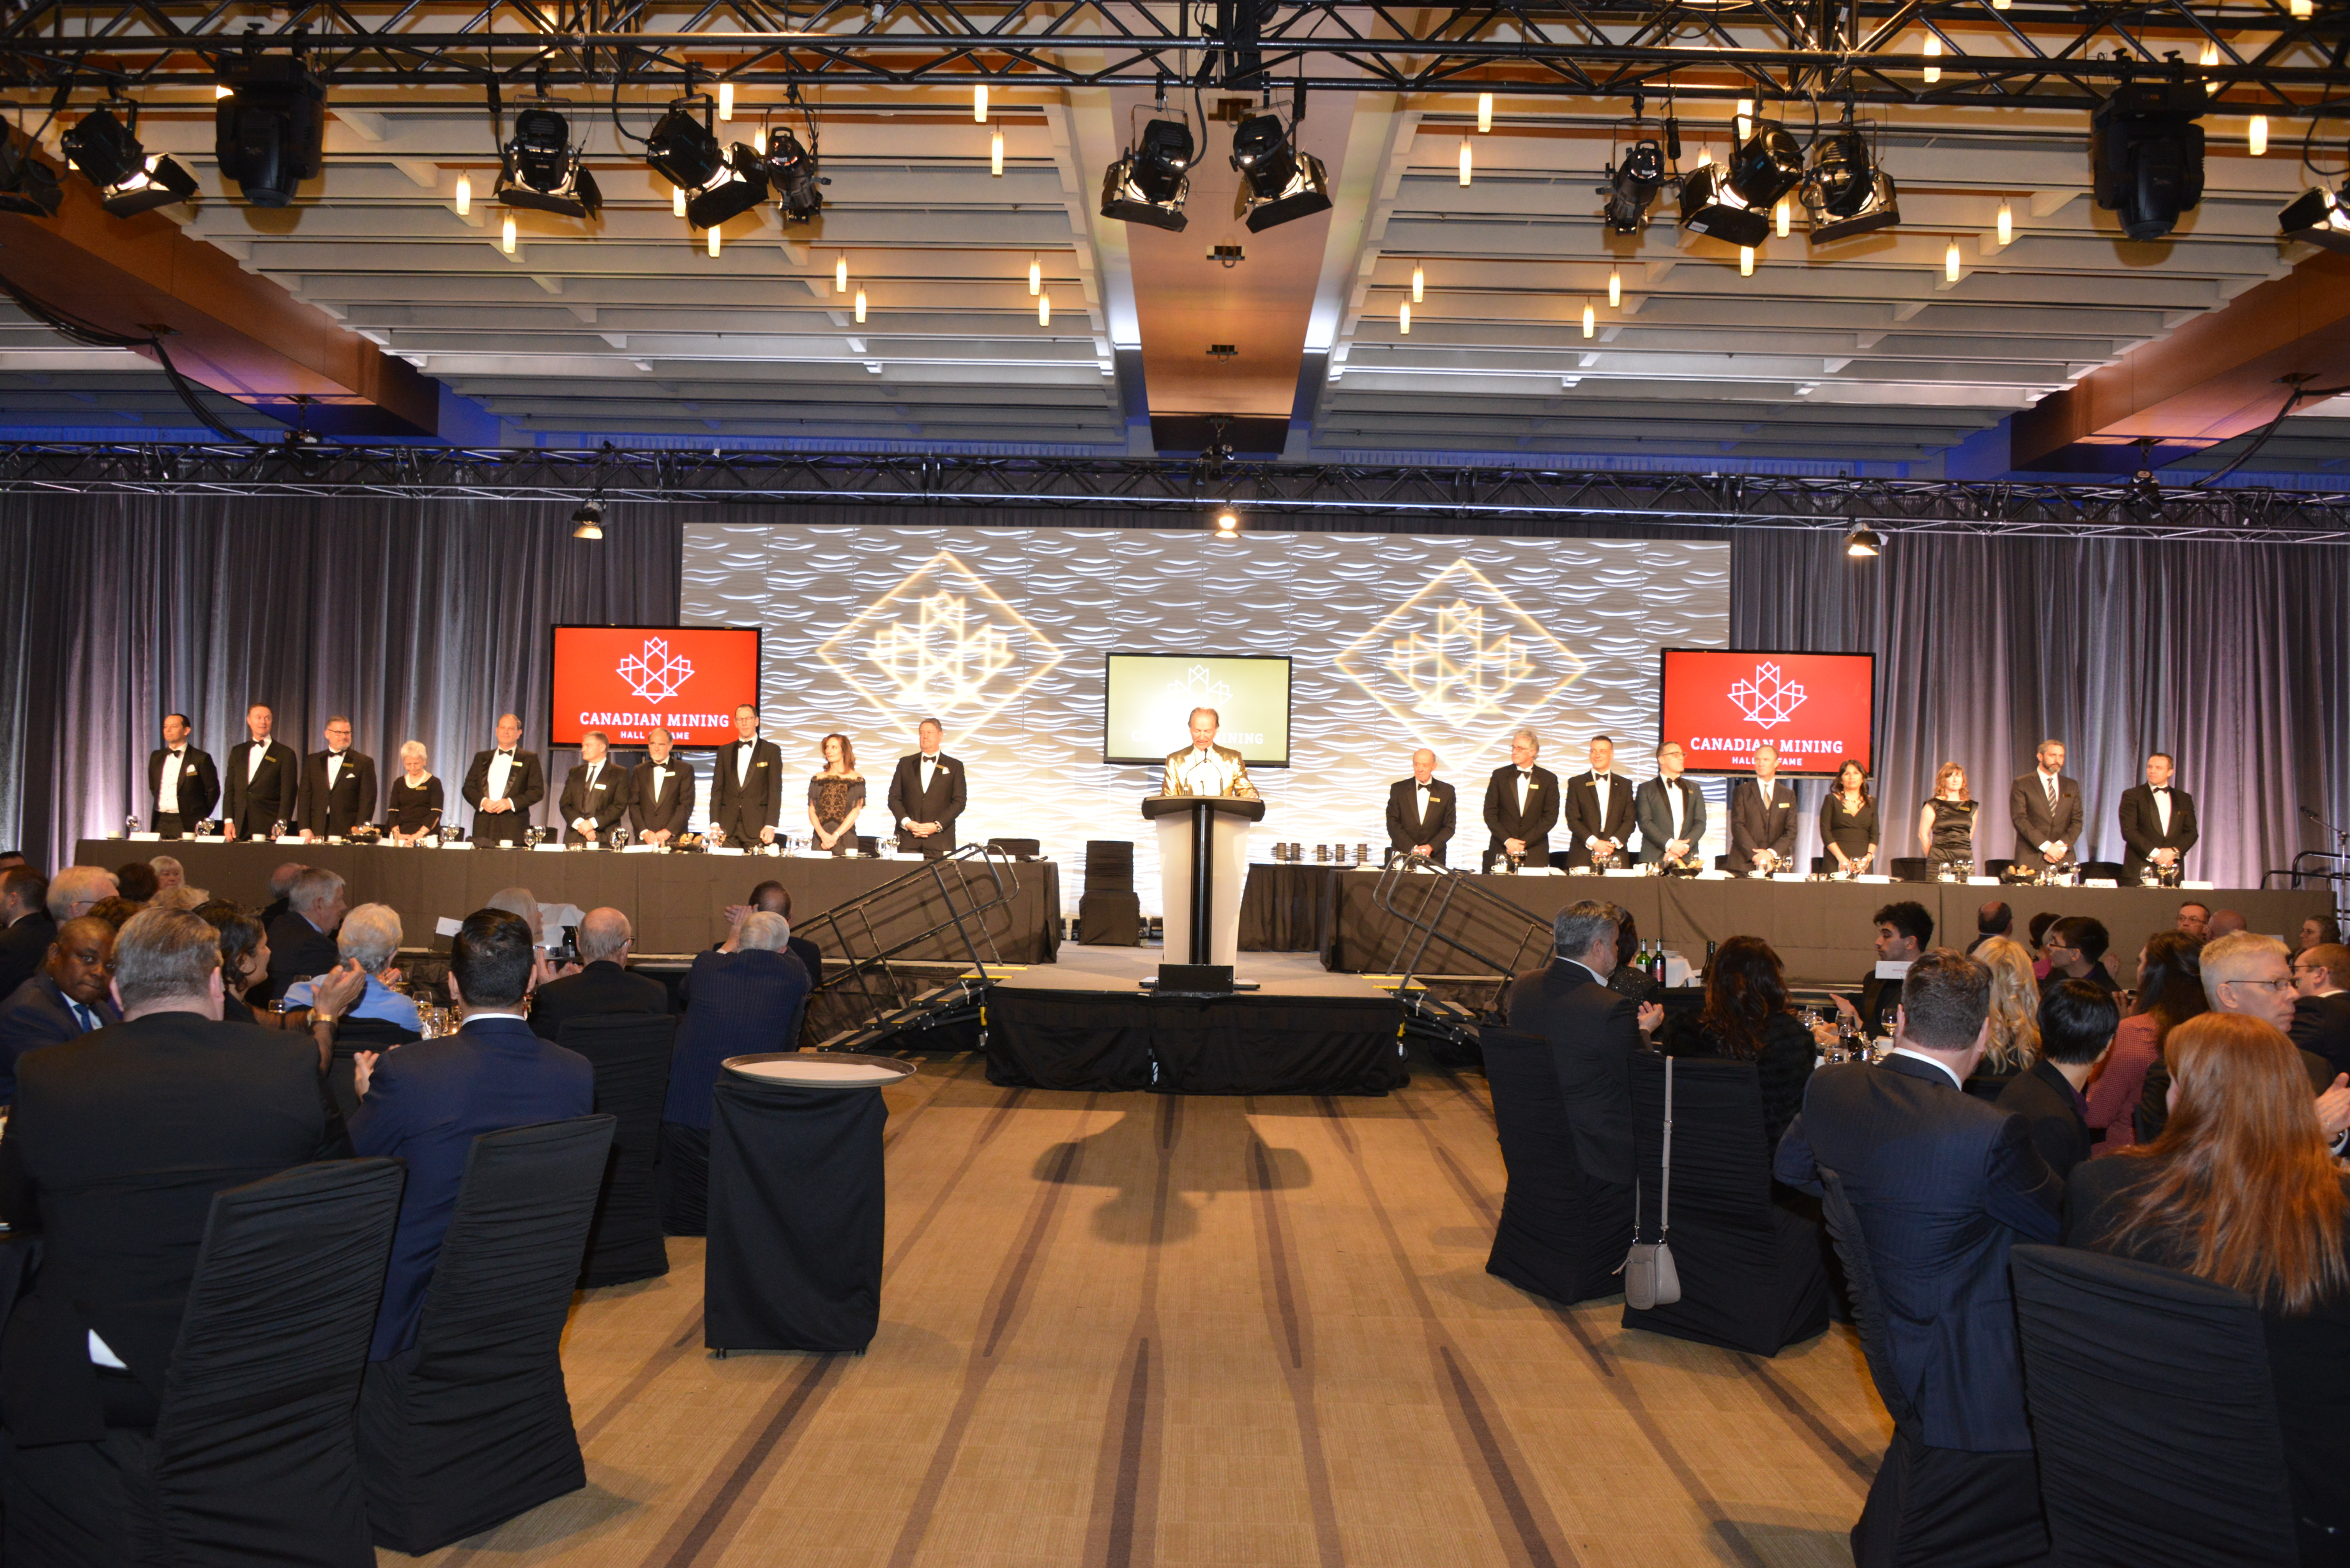 Five pioneers inducted into the Canadian Mining Hall of Fame